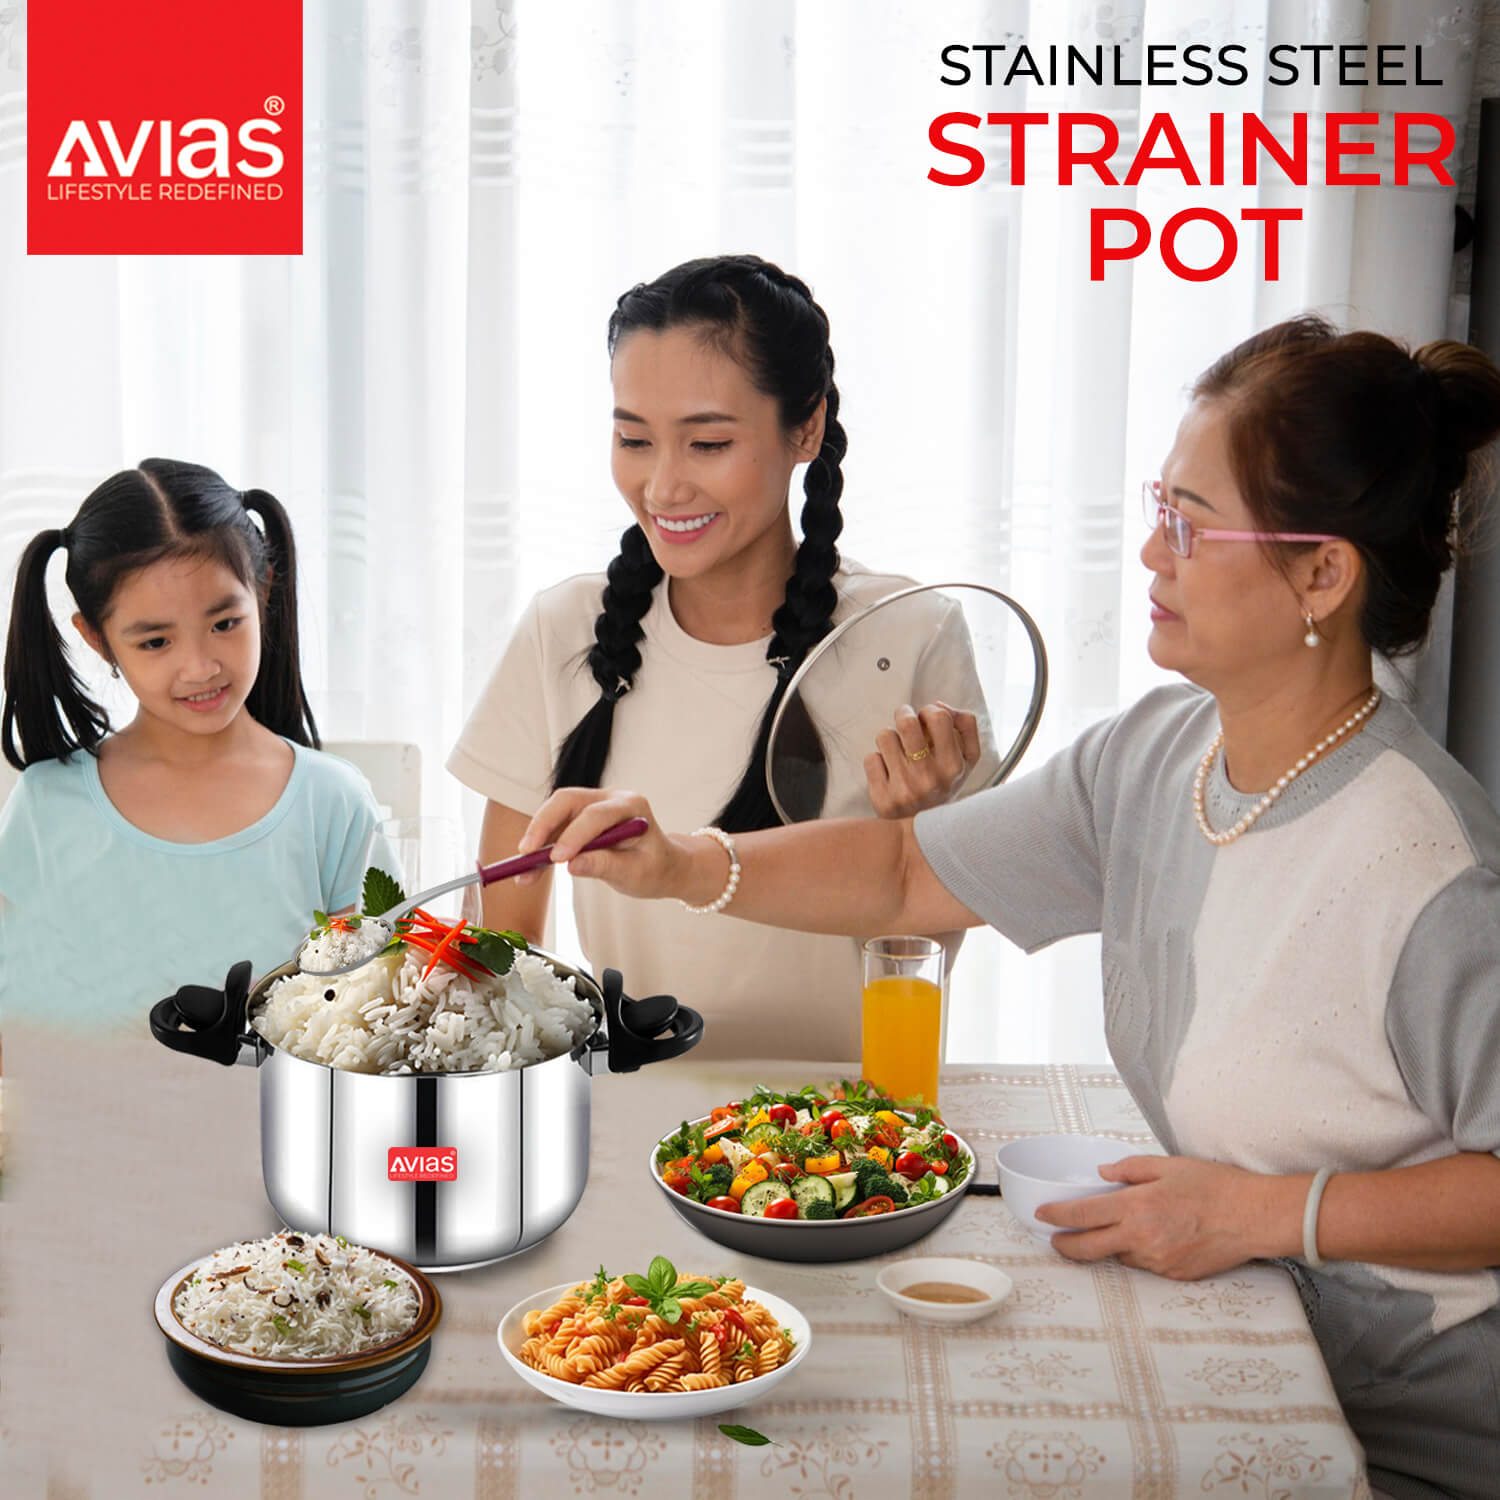 Avias Stainless Steel Strainer Pot with Strainer and Glass Lid for cooking and serving